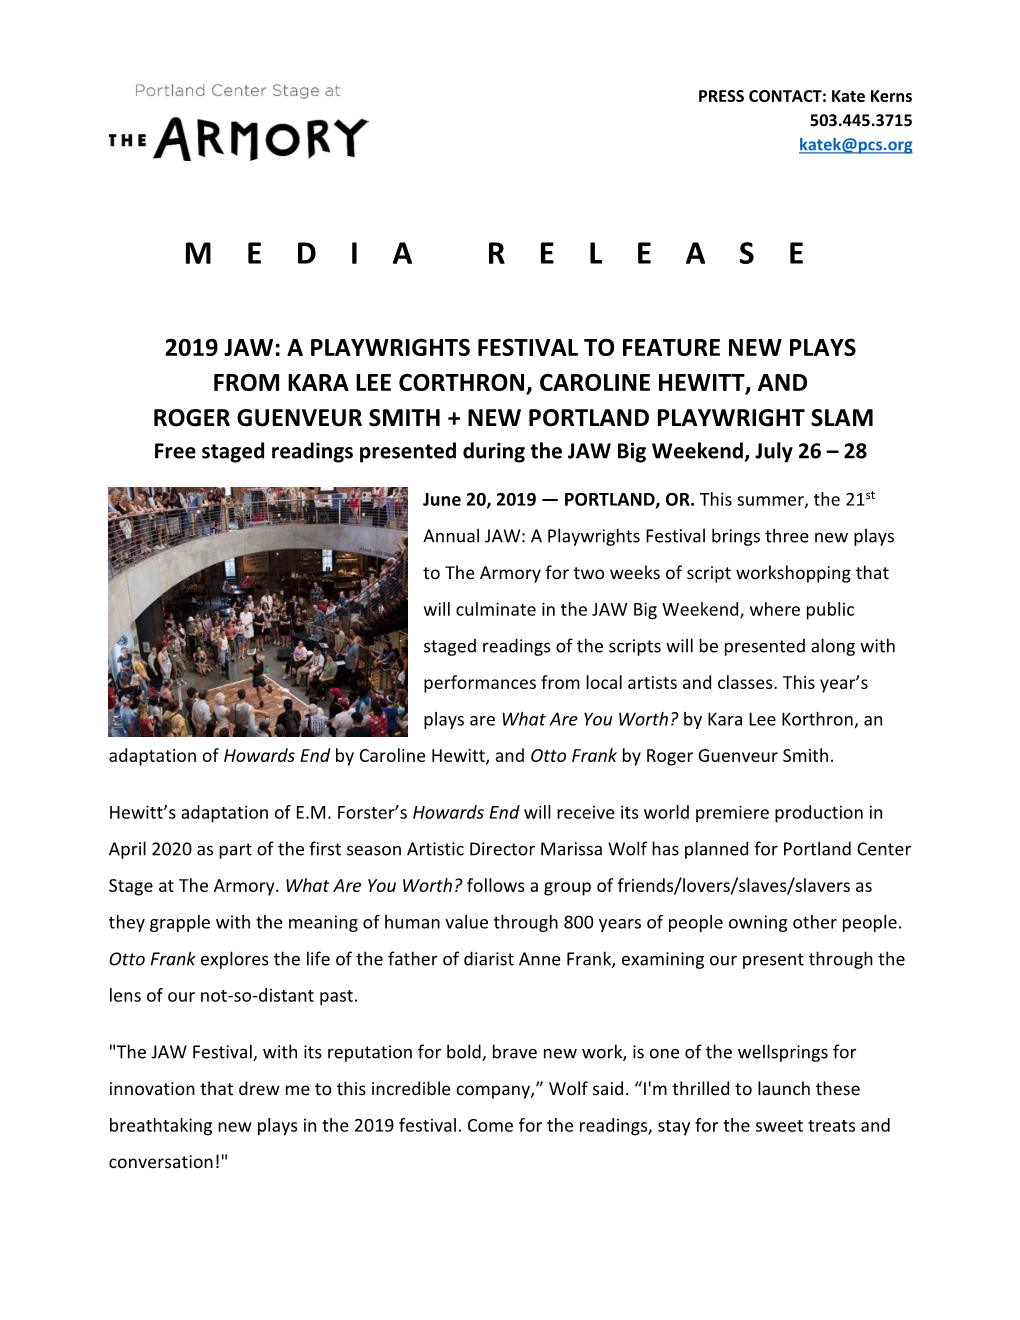 JAW 2019 Playwright Announcement